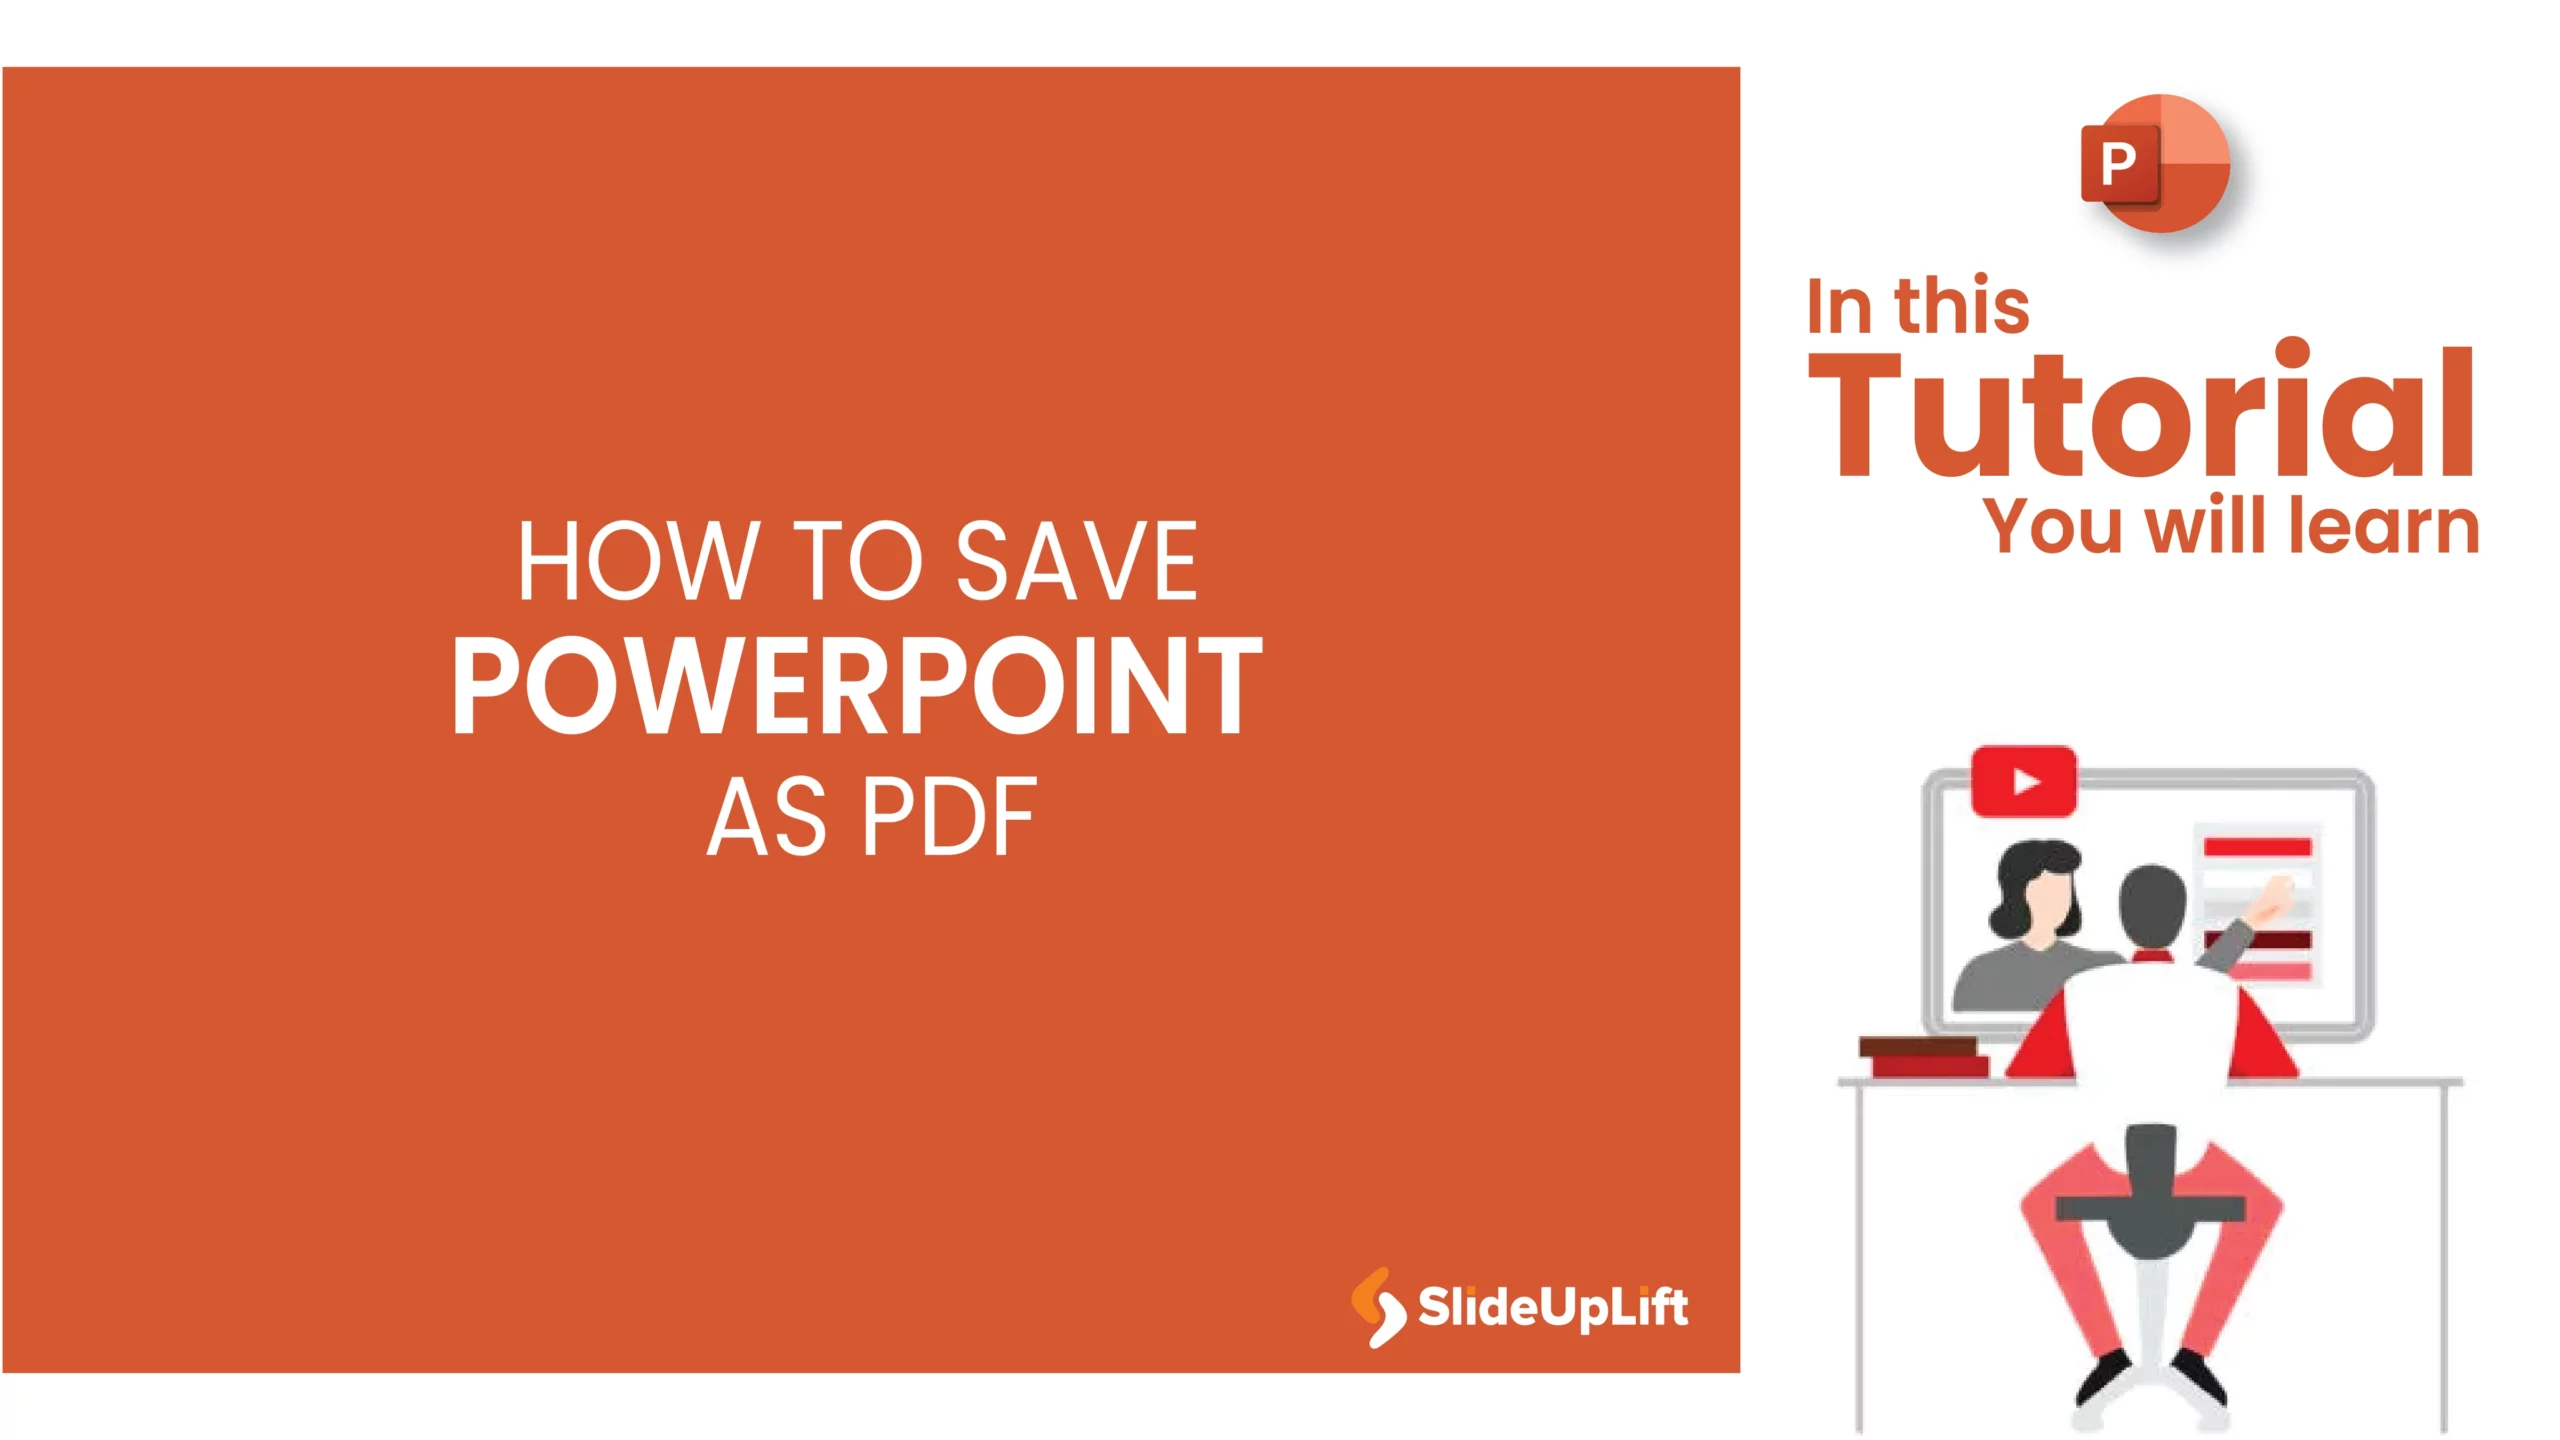 How to save PowerPoint as PDF?